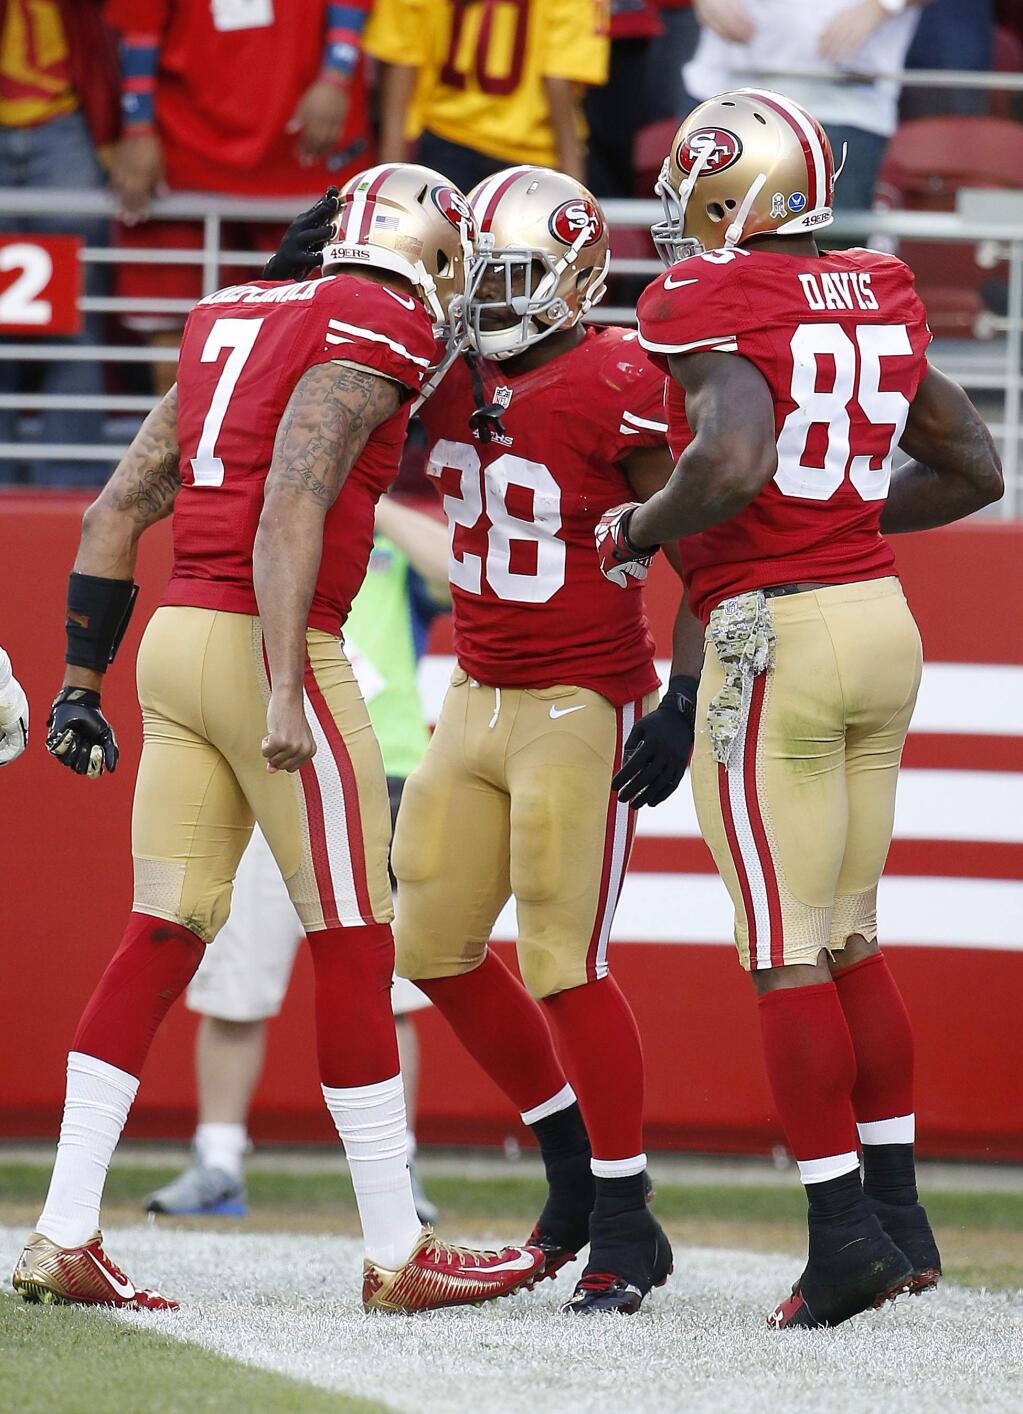 San Francisco 49ers running back Carlos Hyde, right, celebrates with quarterback Colin Kaepernick (7) and tight end Vernon Davis (85) after running for a 4-yard touchdown against the Washington Redskins during the fourth quarter of an NFL football game in Santa Clara, Calif., Sunday, Nov. 23, 2014. (AP Photo/Tony Avelar)